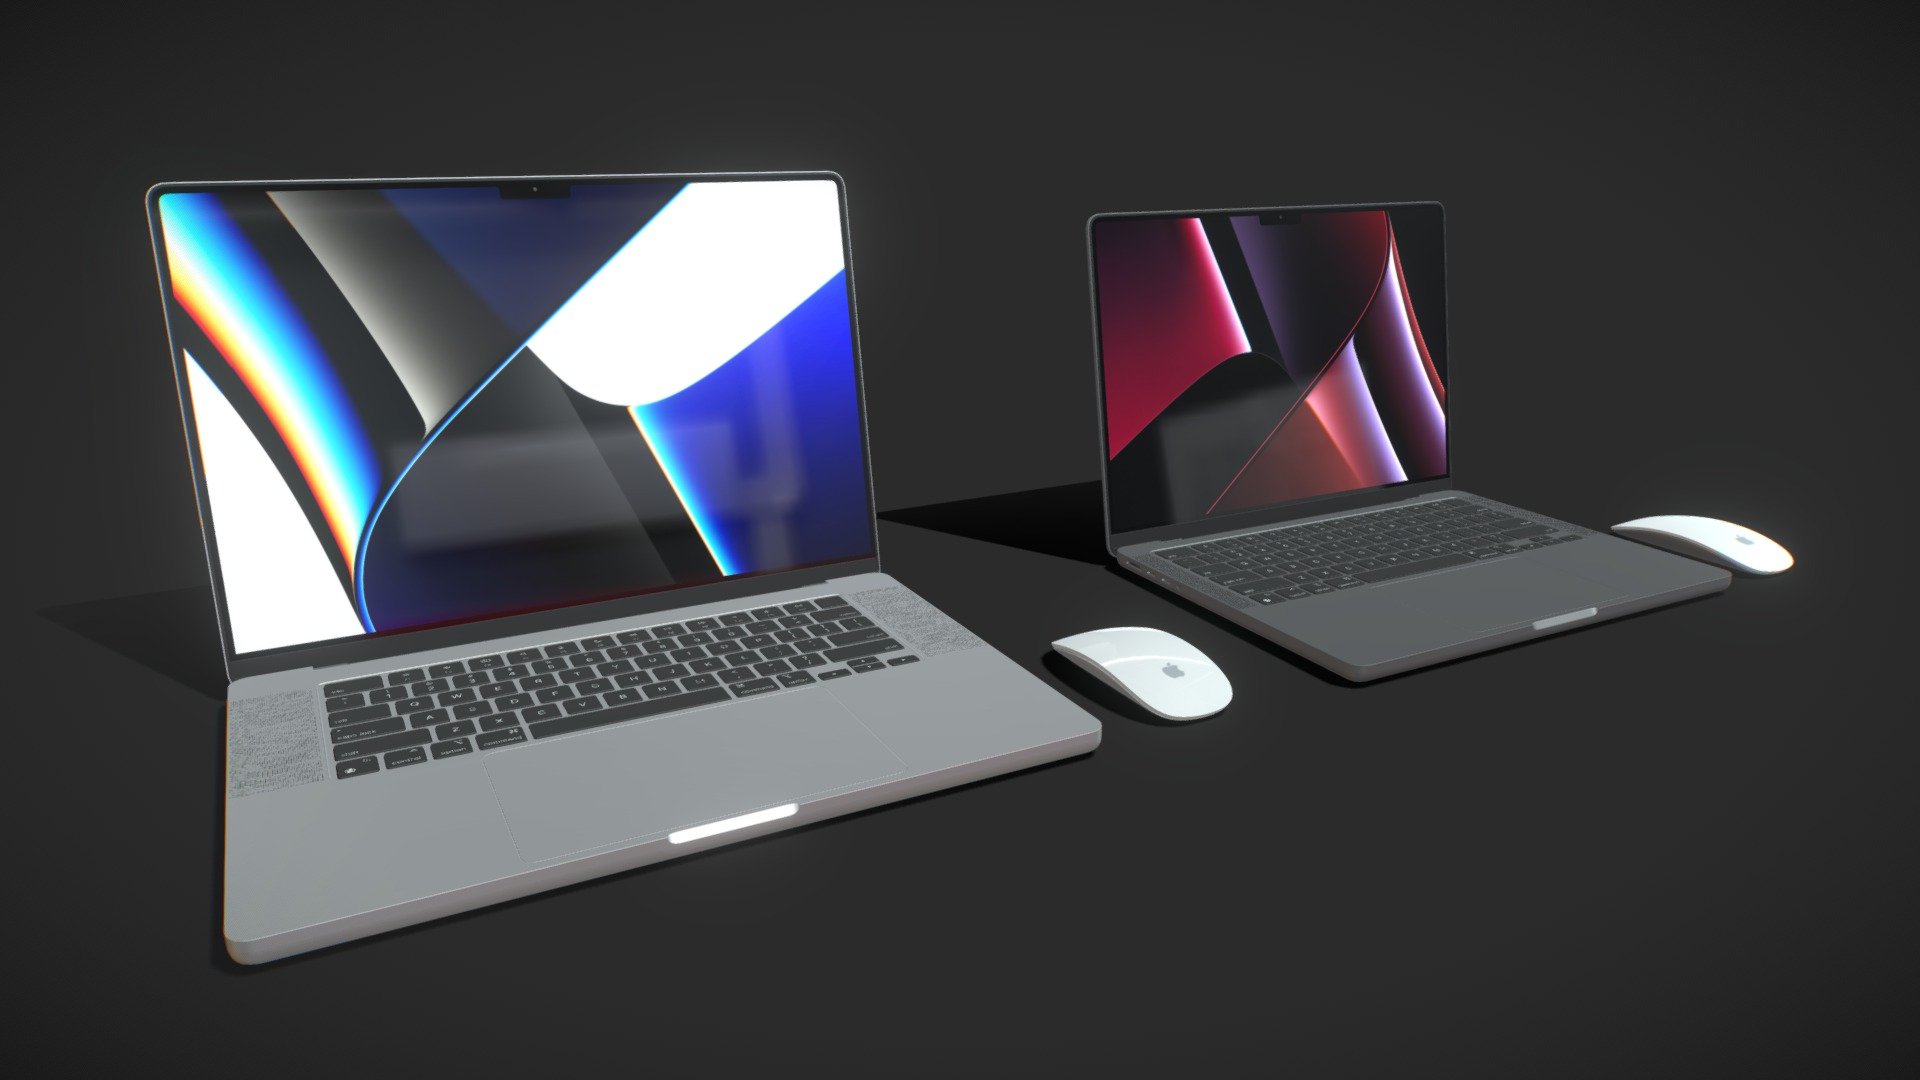 Realistic (copy) 3d model Apple MacBook Pro 14-inch and 16-inch 2021.

This set:
- 2 file obj standard
- 2 file 3ds Max 2013 vray material (animation)
- 2 file 3ds Max 2013 corona material (animation)
- 2 file 3ds Max 2013 standard material (animation)
- 2 file of 3Ds
- 2 file e3d full set of materials.
- 2 file cinema 4d standard (animation).
- 2 file blender cycles.

Topology of geometry:
- forms and proportions of The 3D model
- the geometry of the model was created very neatly
- there are no many-sided polygons
- detailed enough for close-up renders
- the model optimized for turbosmooth modifier
- Not collapsed the turbosmooth modified
- apply the Smooth modifier with a parameter to get the desired level of detail

Materials and Textures:
- 3ds max files included Vray-Shaders
- 3ds max files included Corona-Shaders
- 3ds max files included Standard-Shaders
- Blender files included cycles shaders
- Cinema 4d files included Standard-Shaders
- Element 3d files
- all texture paths are cleared - Apple MacBook Pro 14-inch and 16-inch 2021 - Buy Royalty Free 3D model by madMIX 3d model